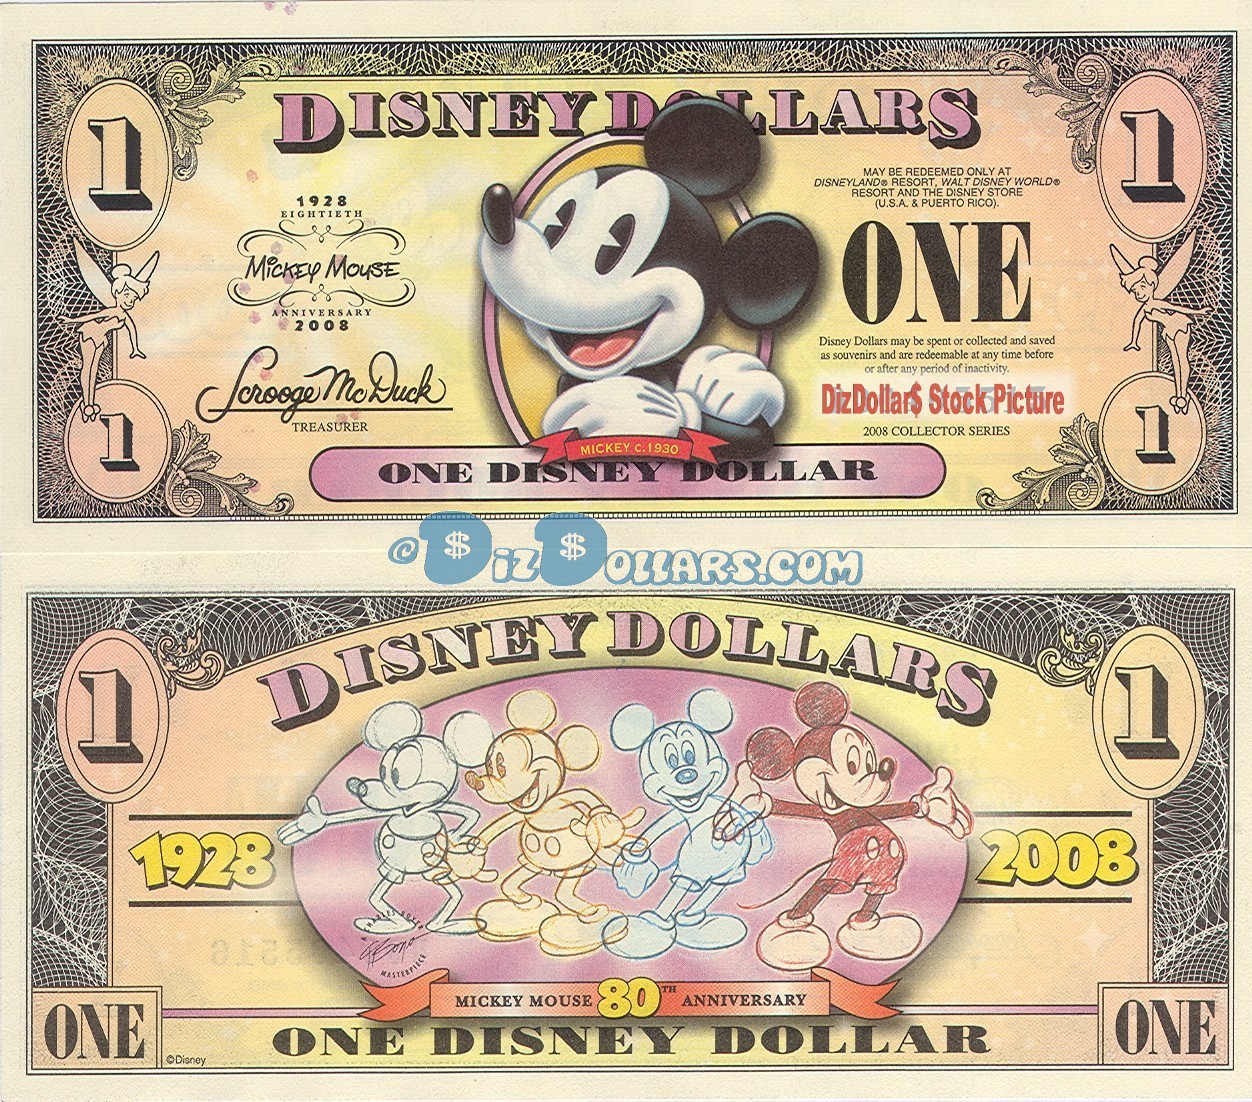 2008 "T" $1 MINT UNC Disney Dollar - Boyer's Pie-Eyed Mickey Front Boyer's Mickey through the years back - "T" Mickey Mouse's 80th Anniversary Series from Disney Store ~ © DIZDOLLARS.com